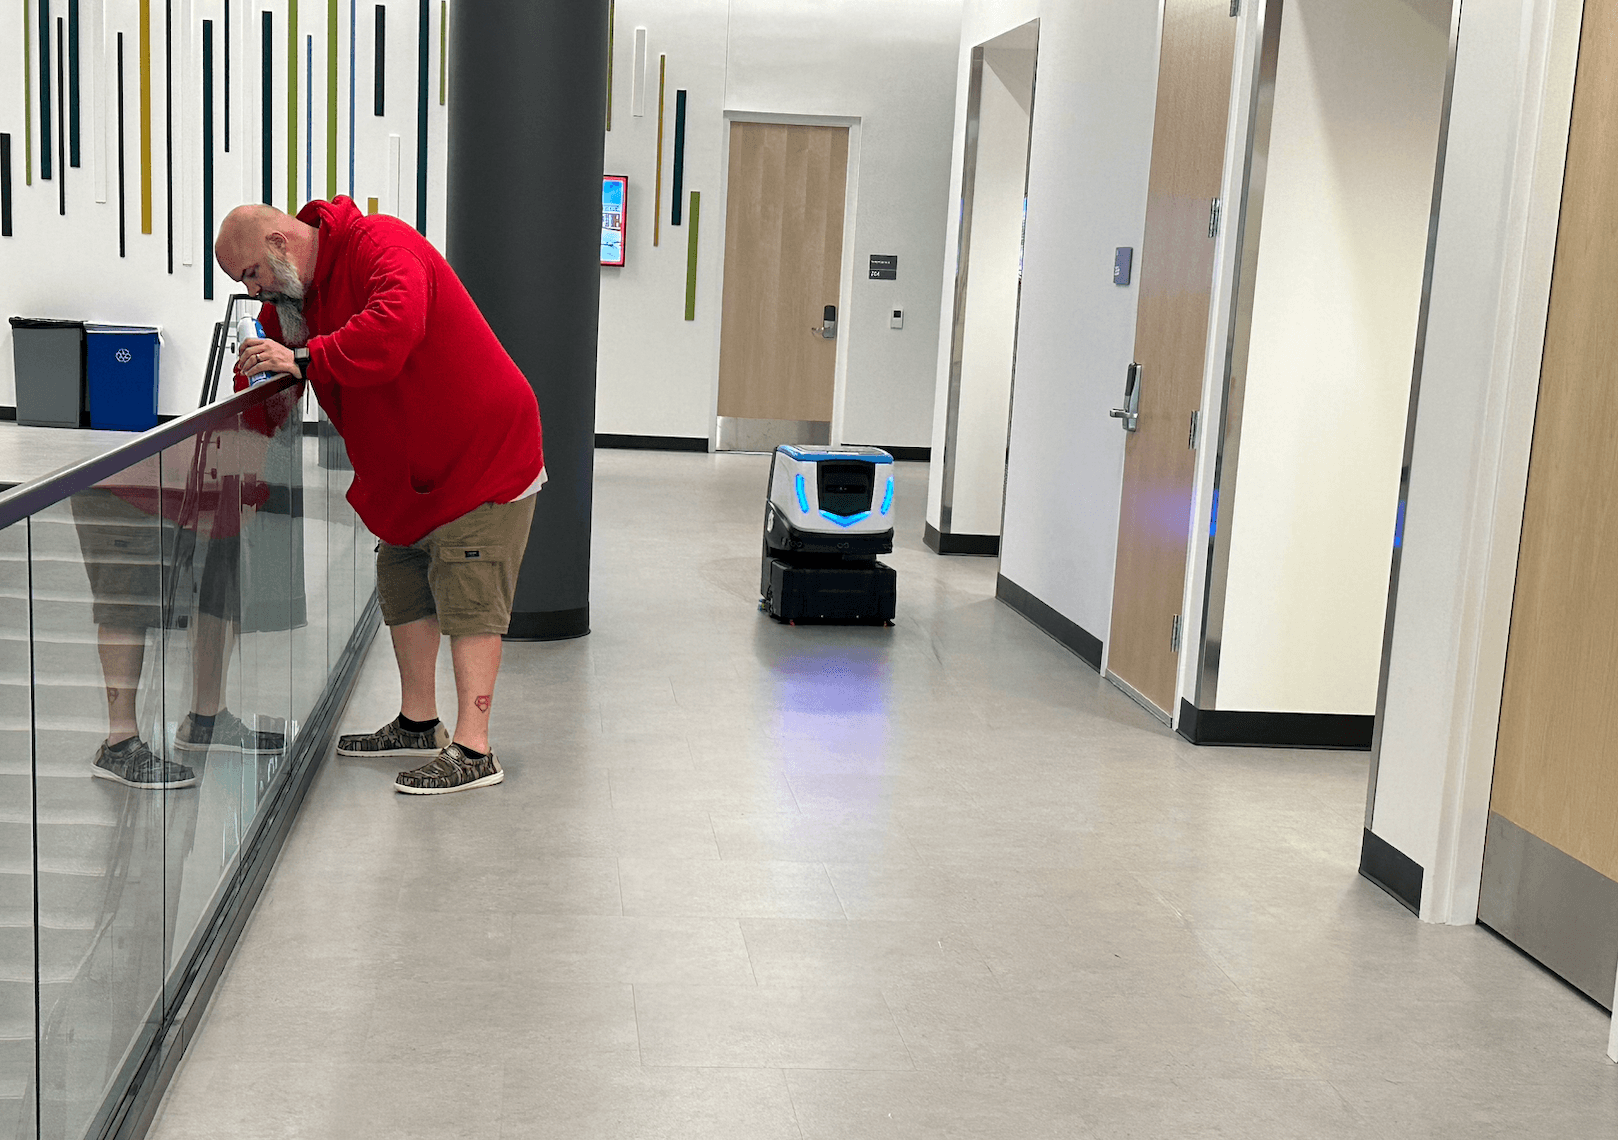 Cobi 18 robotic scrubber supporting custodial staff in higher ed facility